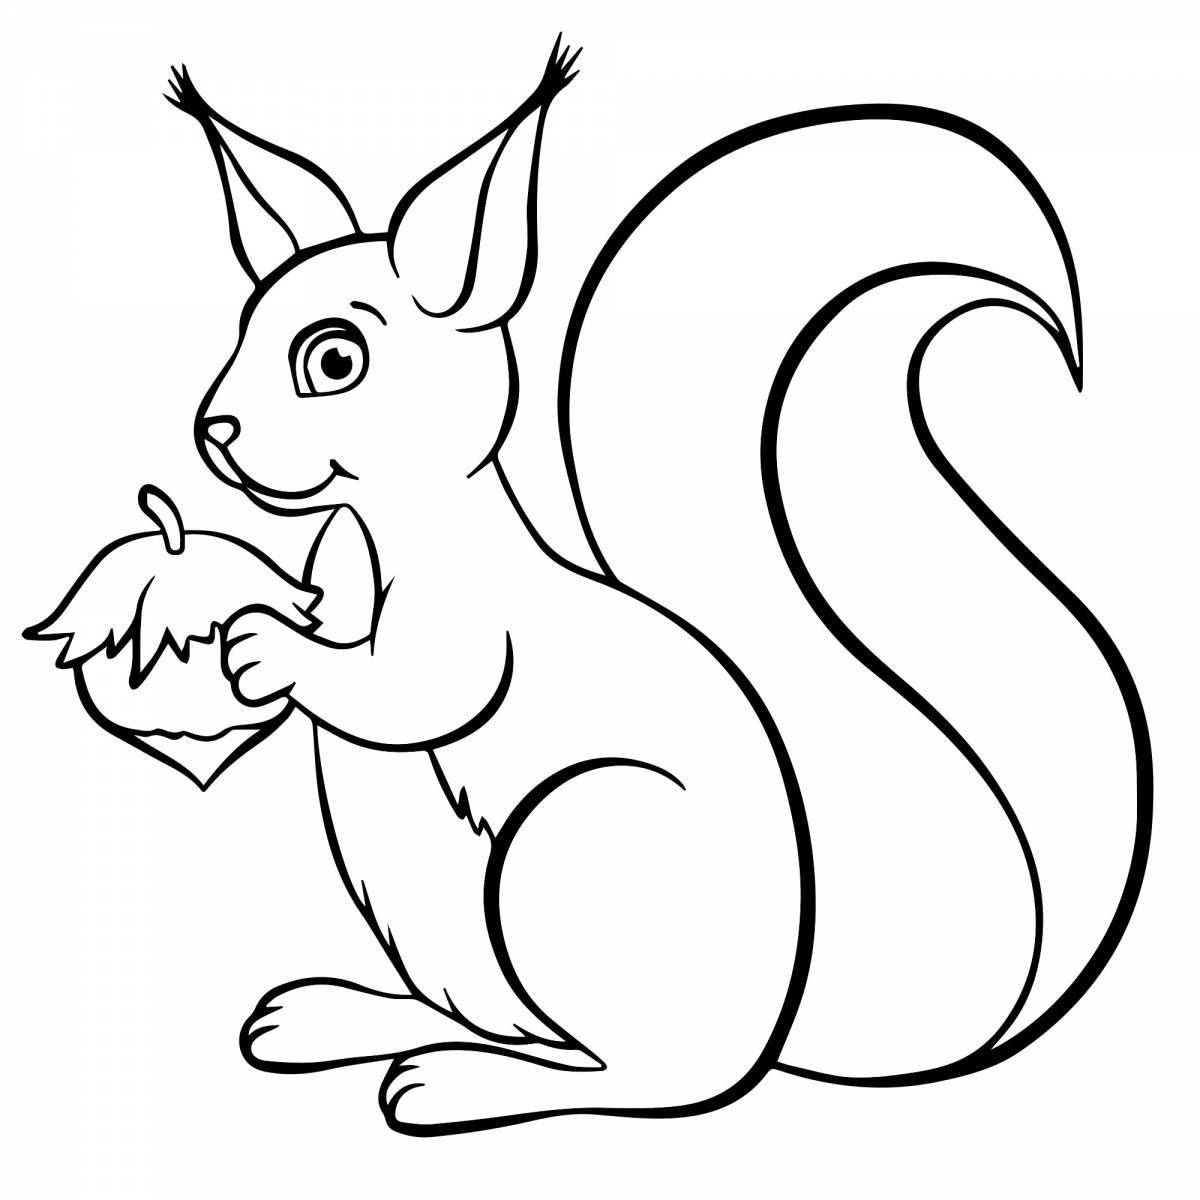 Charming squirrel coloring book for 3-4 year olds